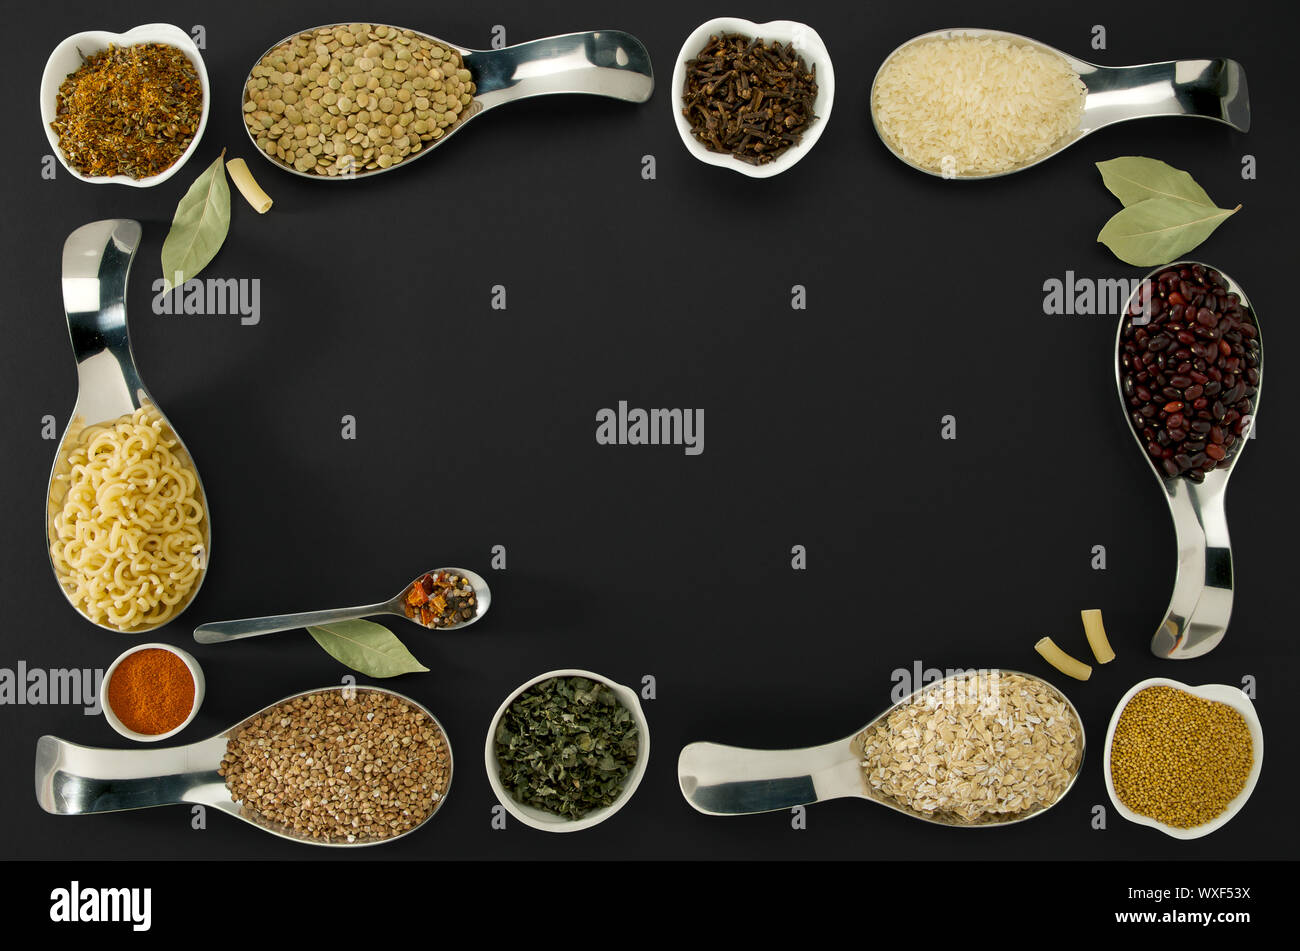 BEANS RICE BUCKWHEAT SEEDS LENTILS SPICES IN SPOONS ON A BLACK BACKGROUND Stock Photo